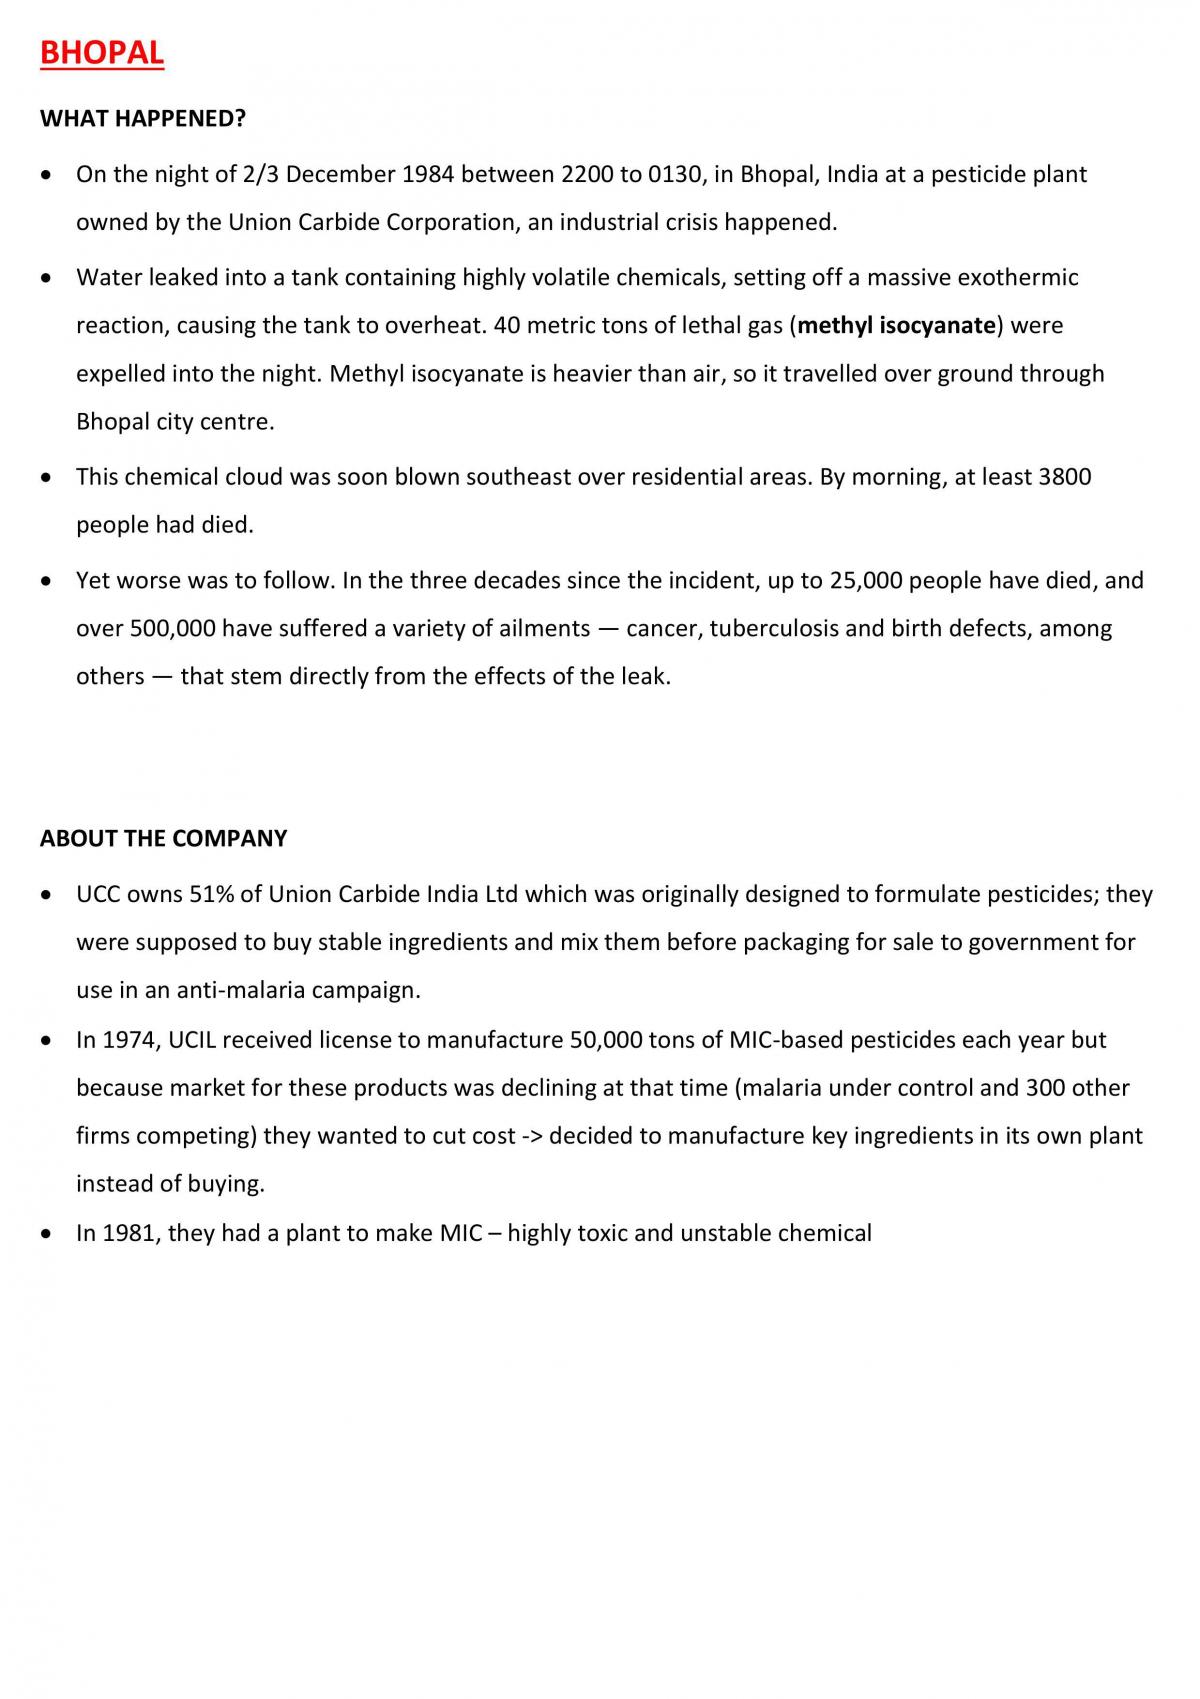 BGS 8 Business Scandals - Page 1